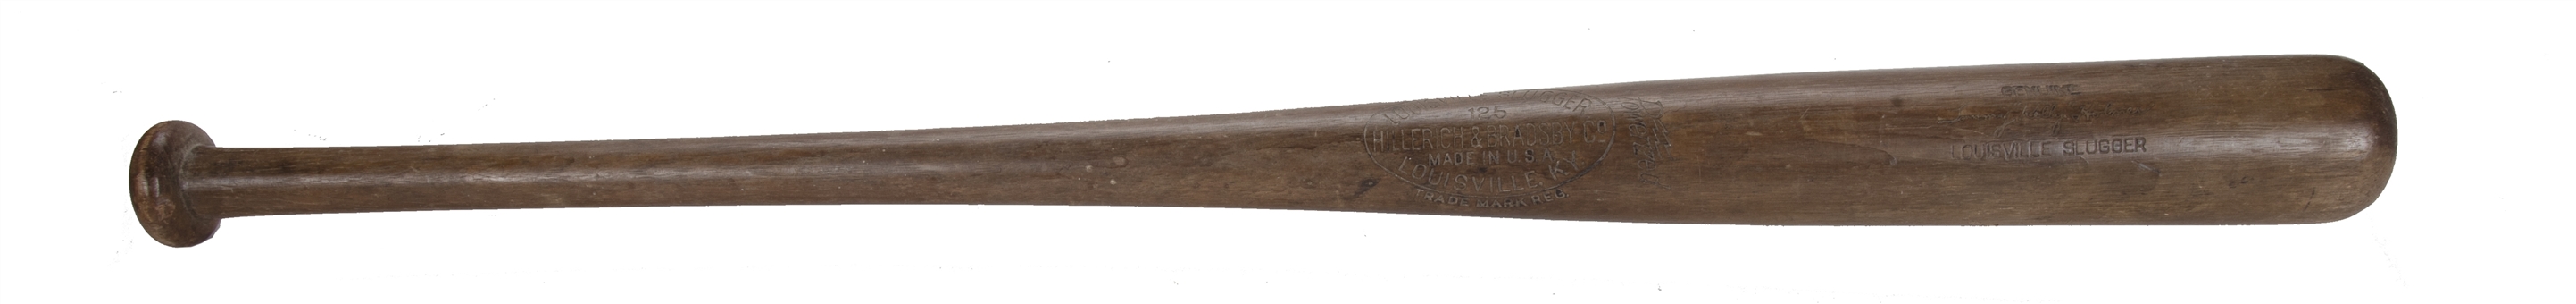 1946-1947 Tommy Holmes Game Used Hillerich & Bradsby Pre Model Bat (PSA/DNA)